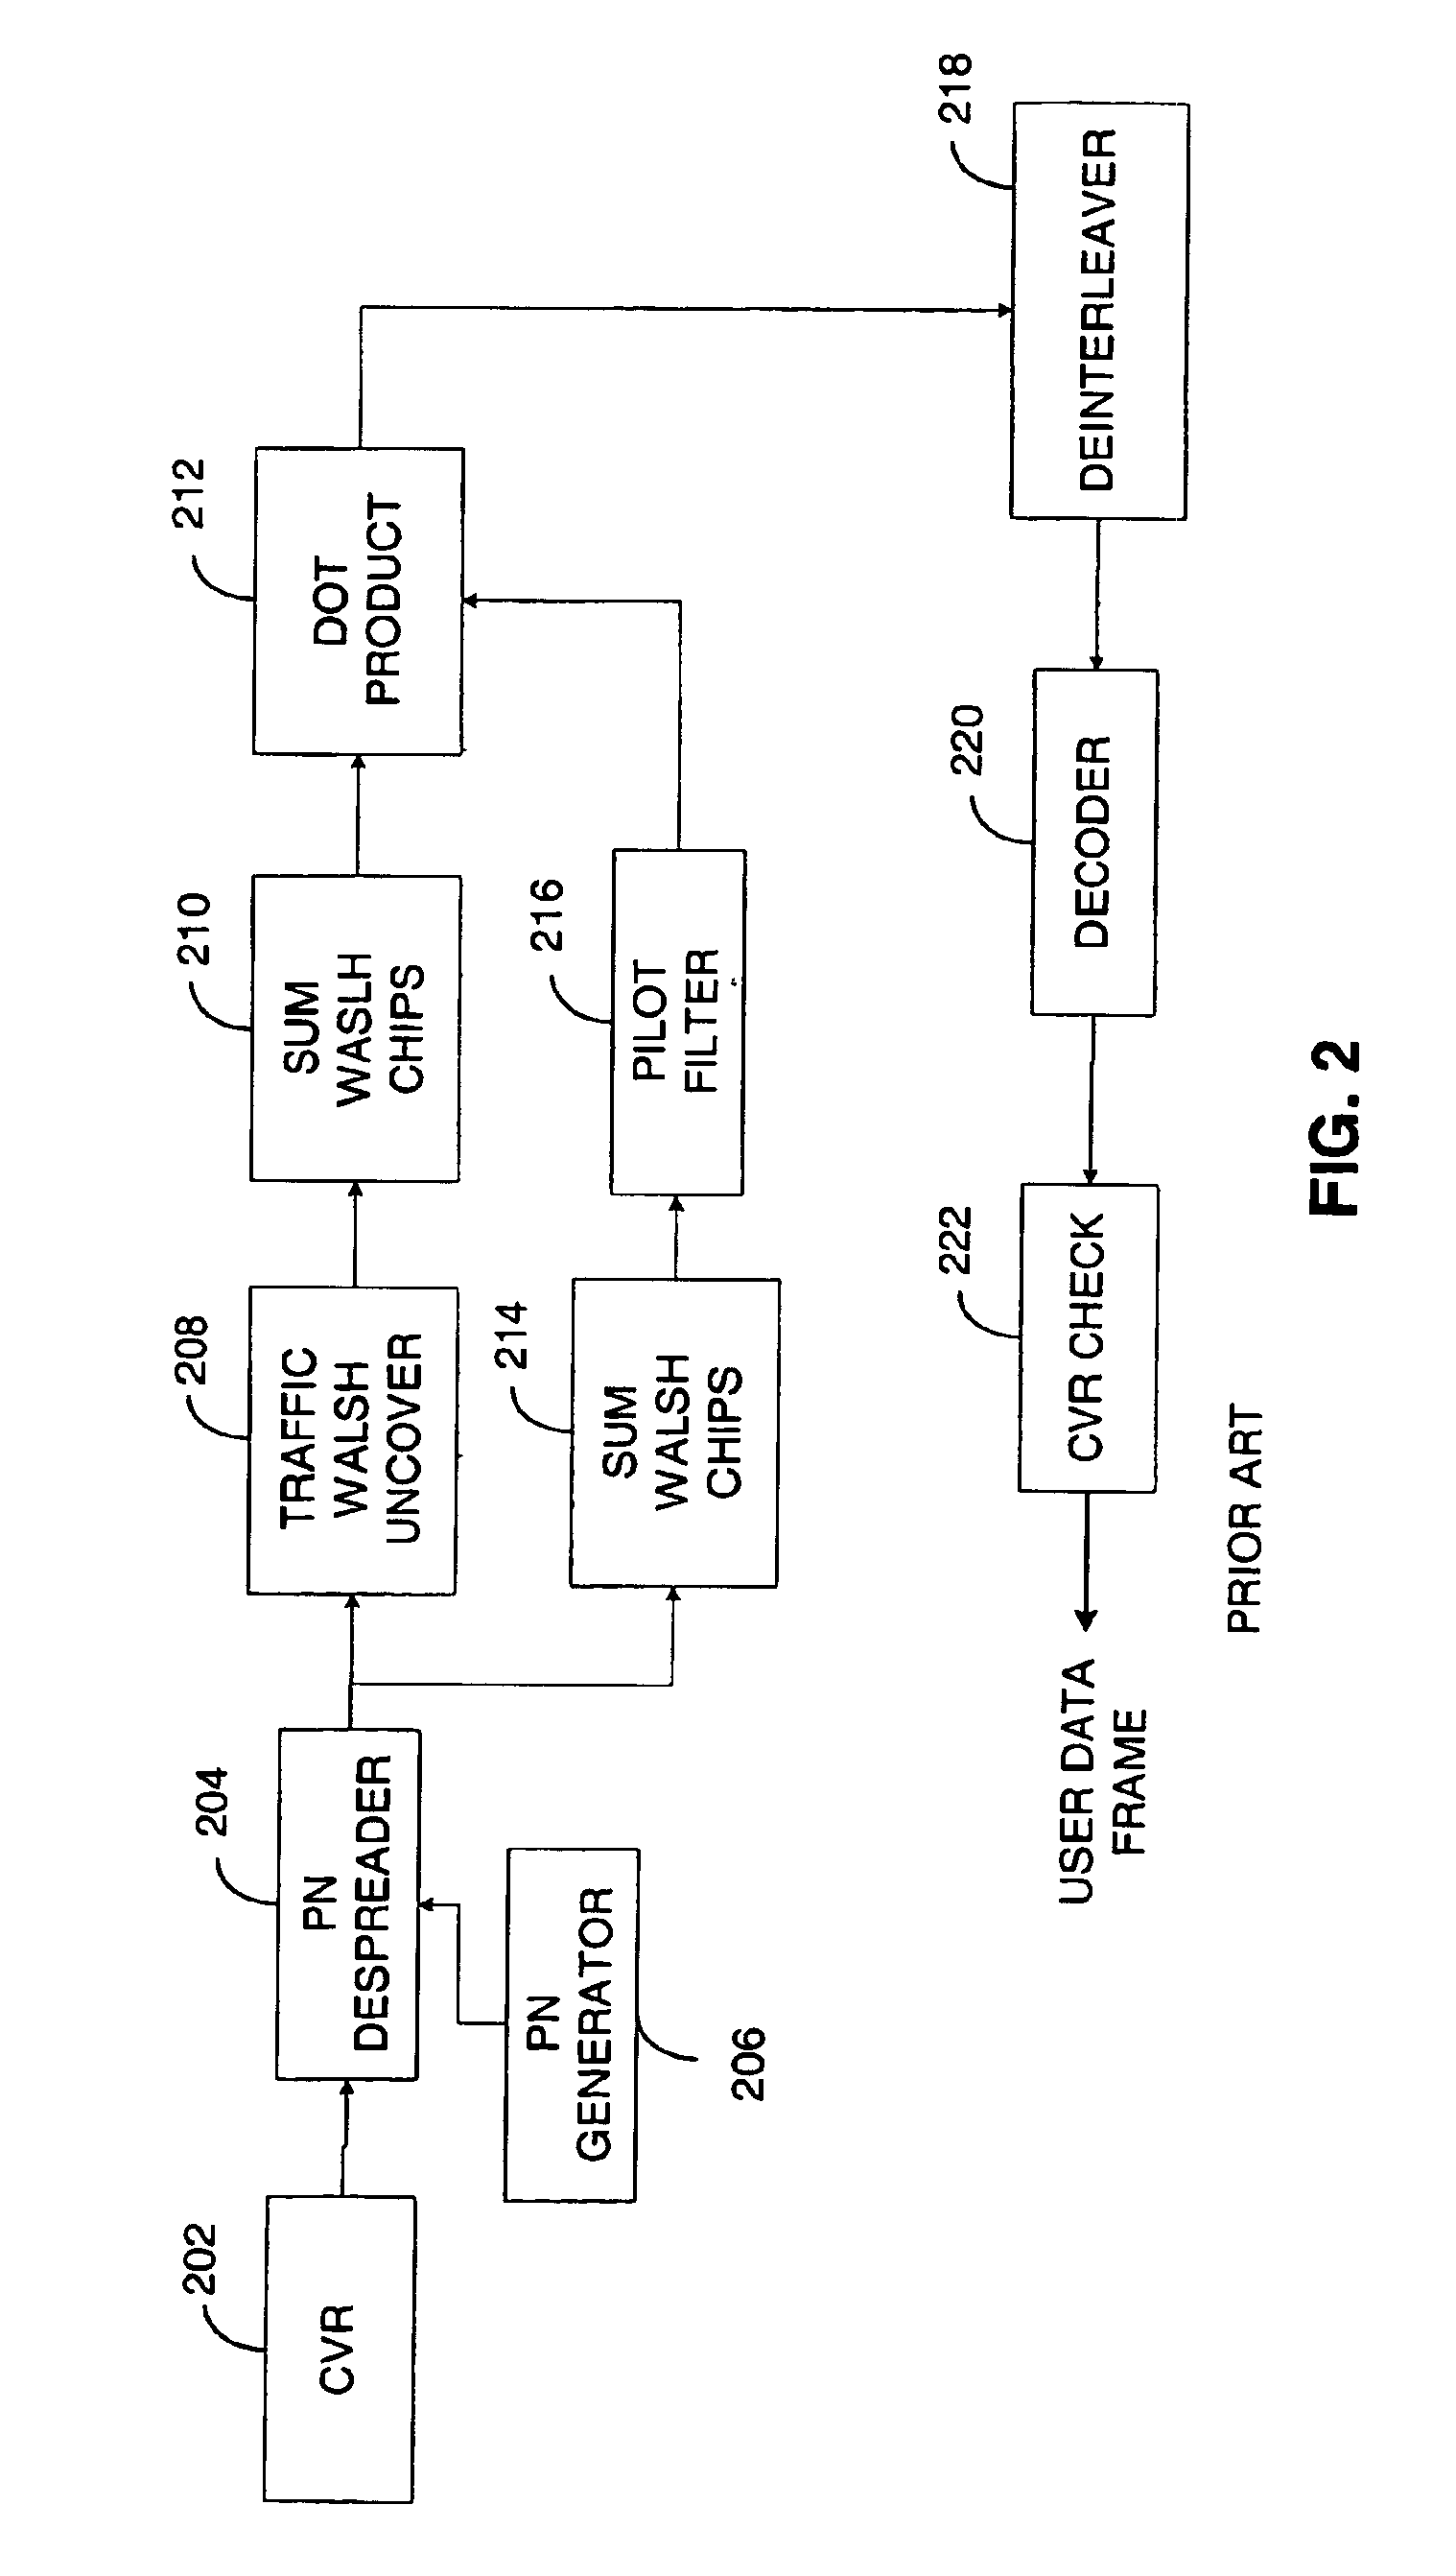 Adaptive channel estimation in a wireless communication system